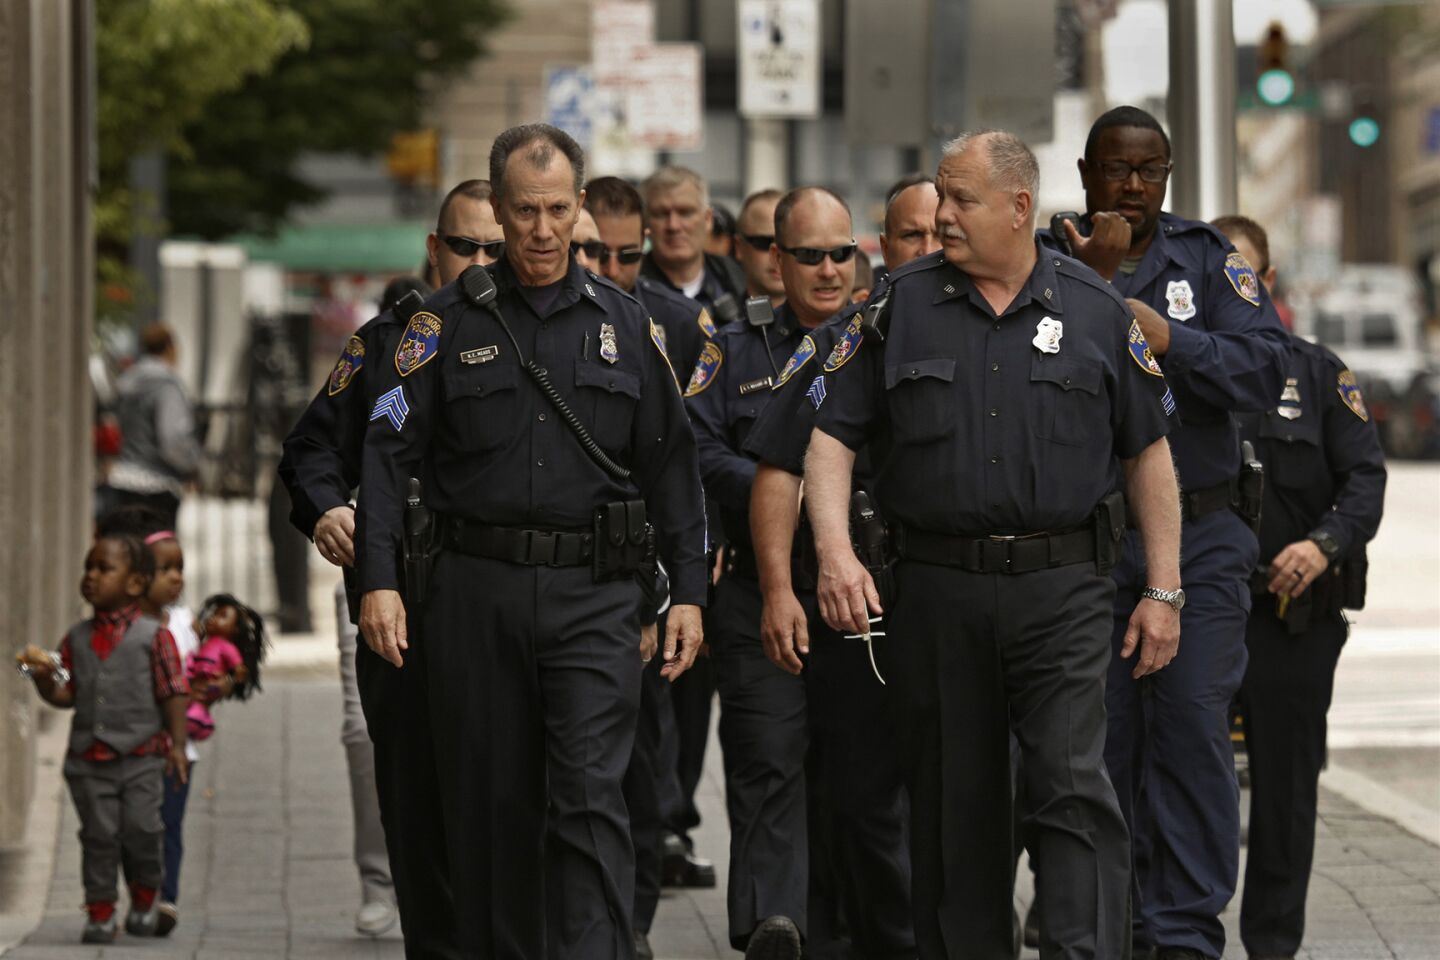 Police in Baltimore